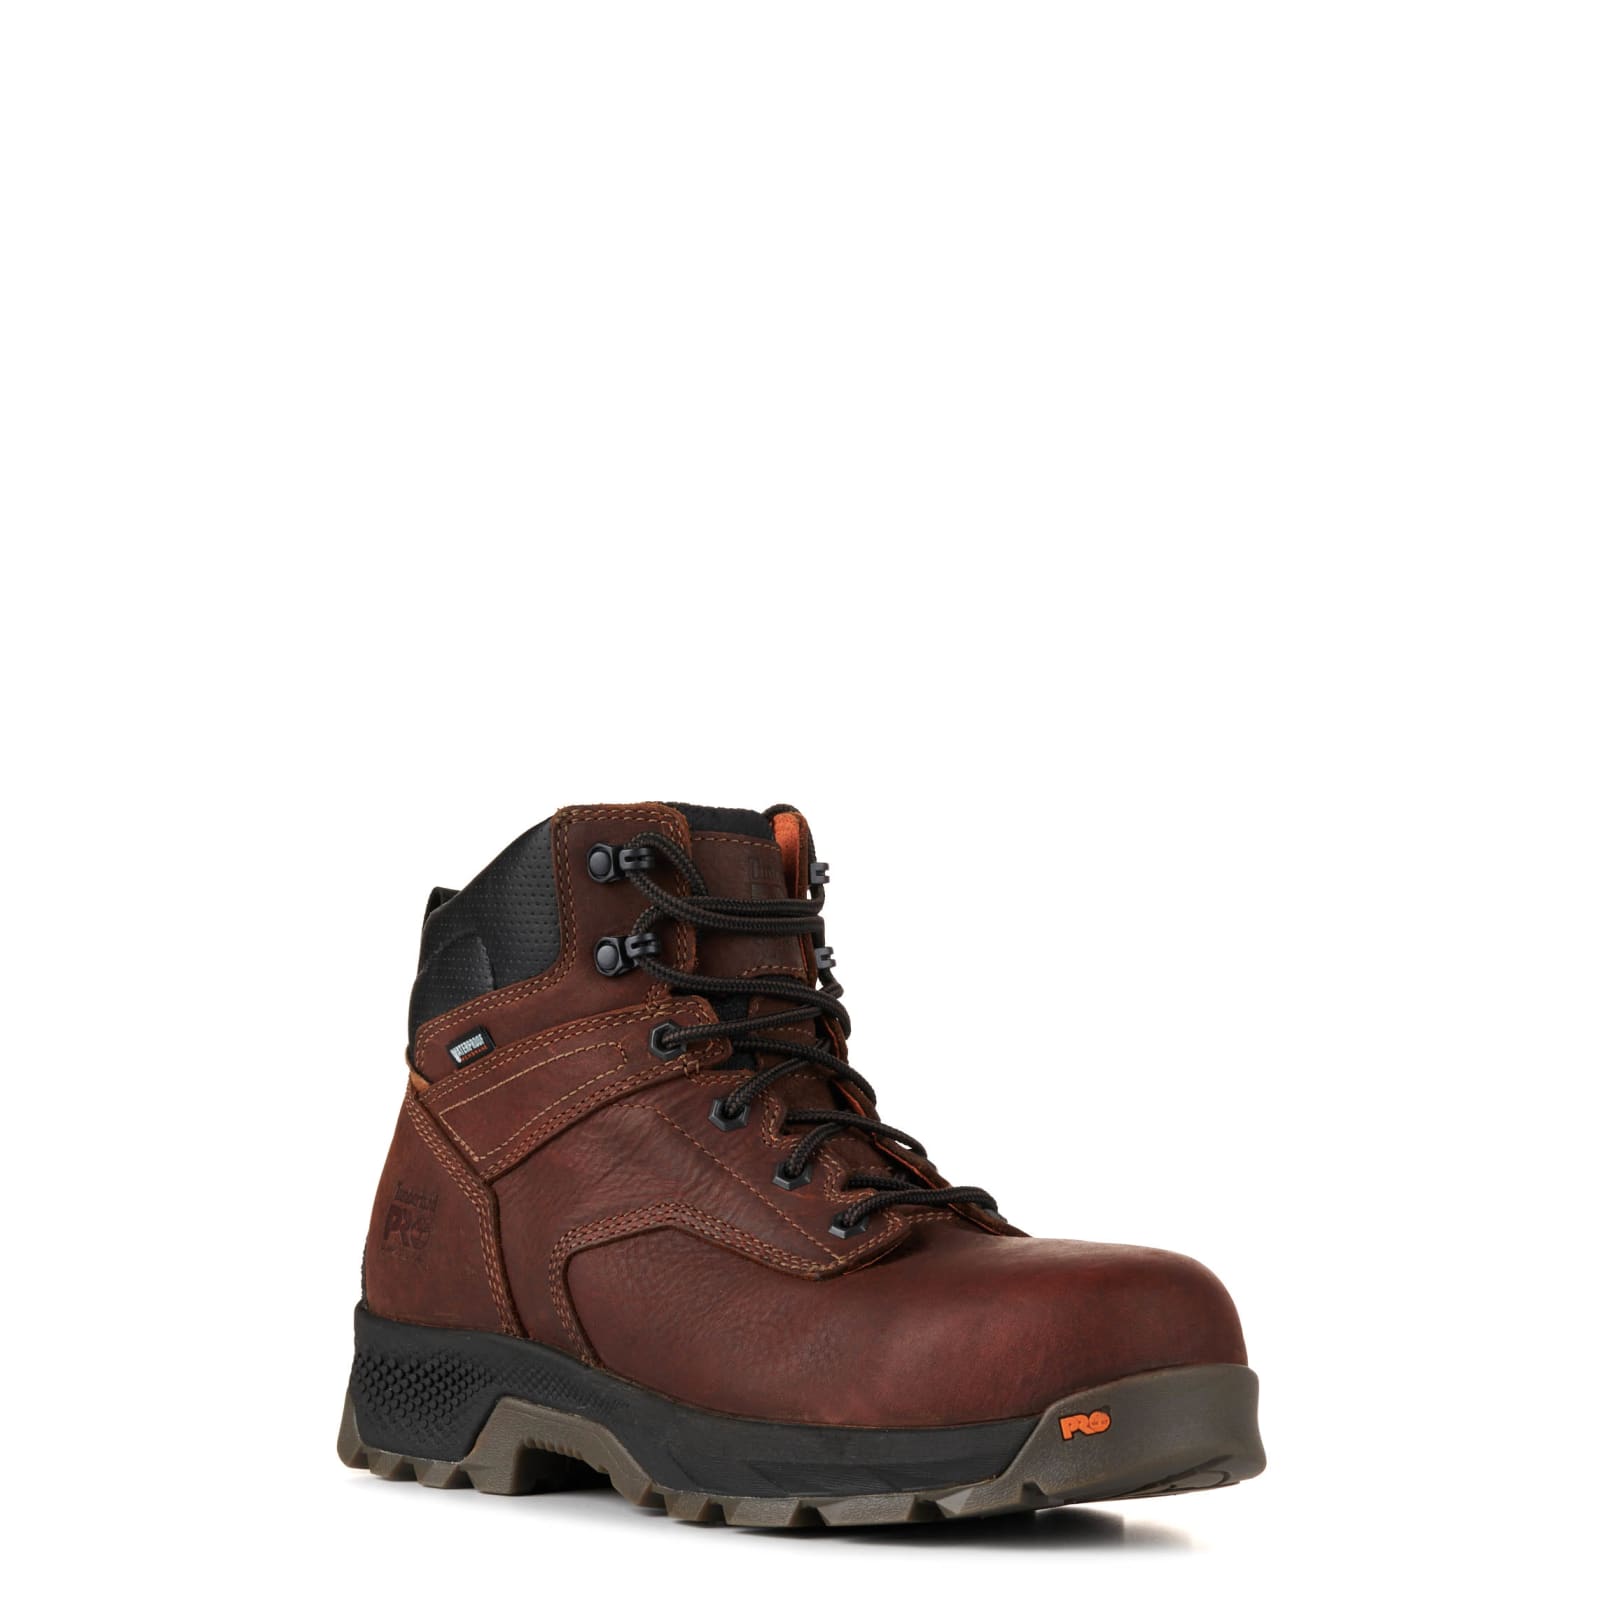 Timberland Pro Men's TiTAN Trailblazer Brown Waterproof Wide Square  Composite Toe 6" Lace Up Work Boots available at Cavenders